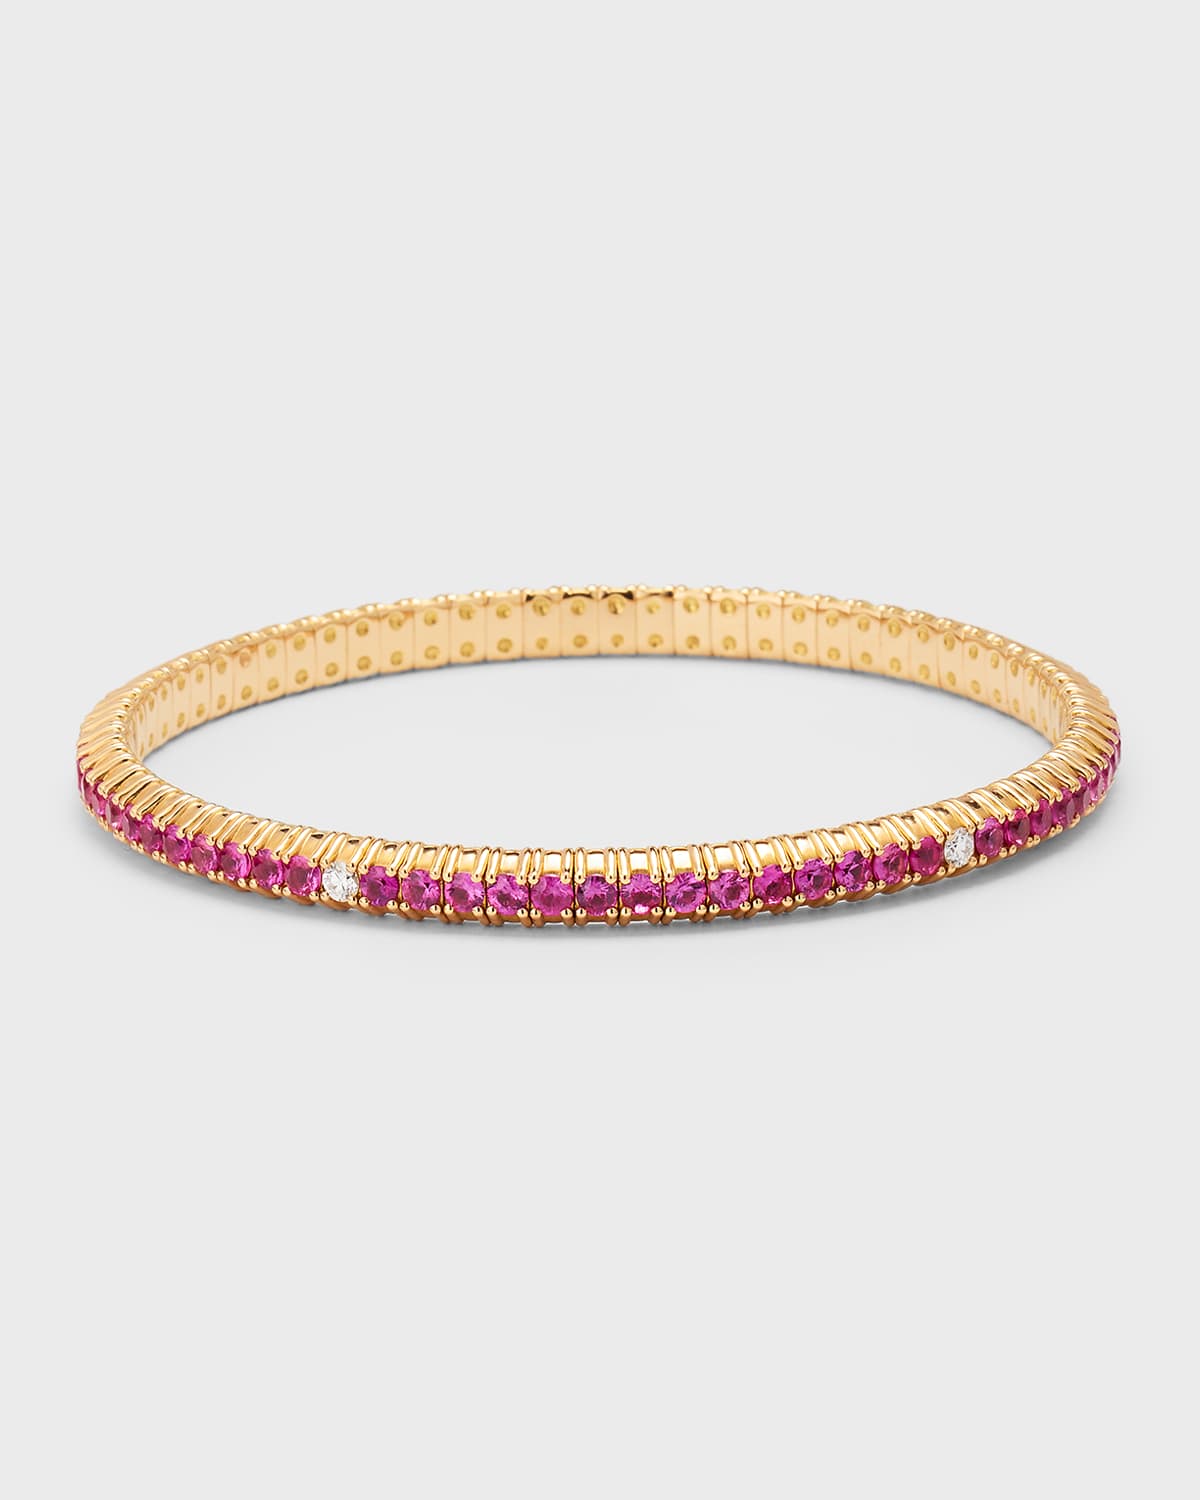 18K Rose Gold Bracelet with Diamonds and Rubies